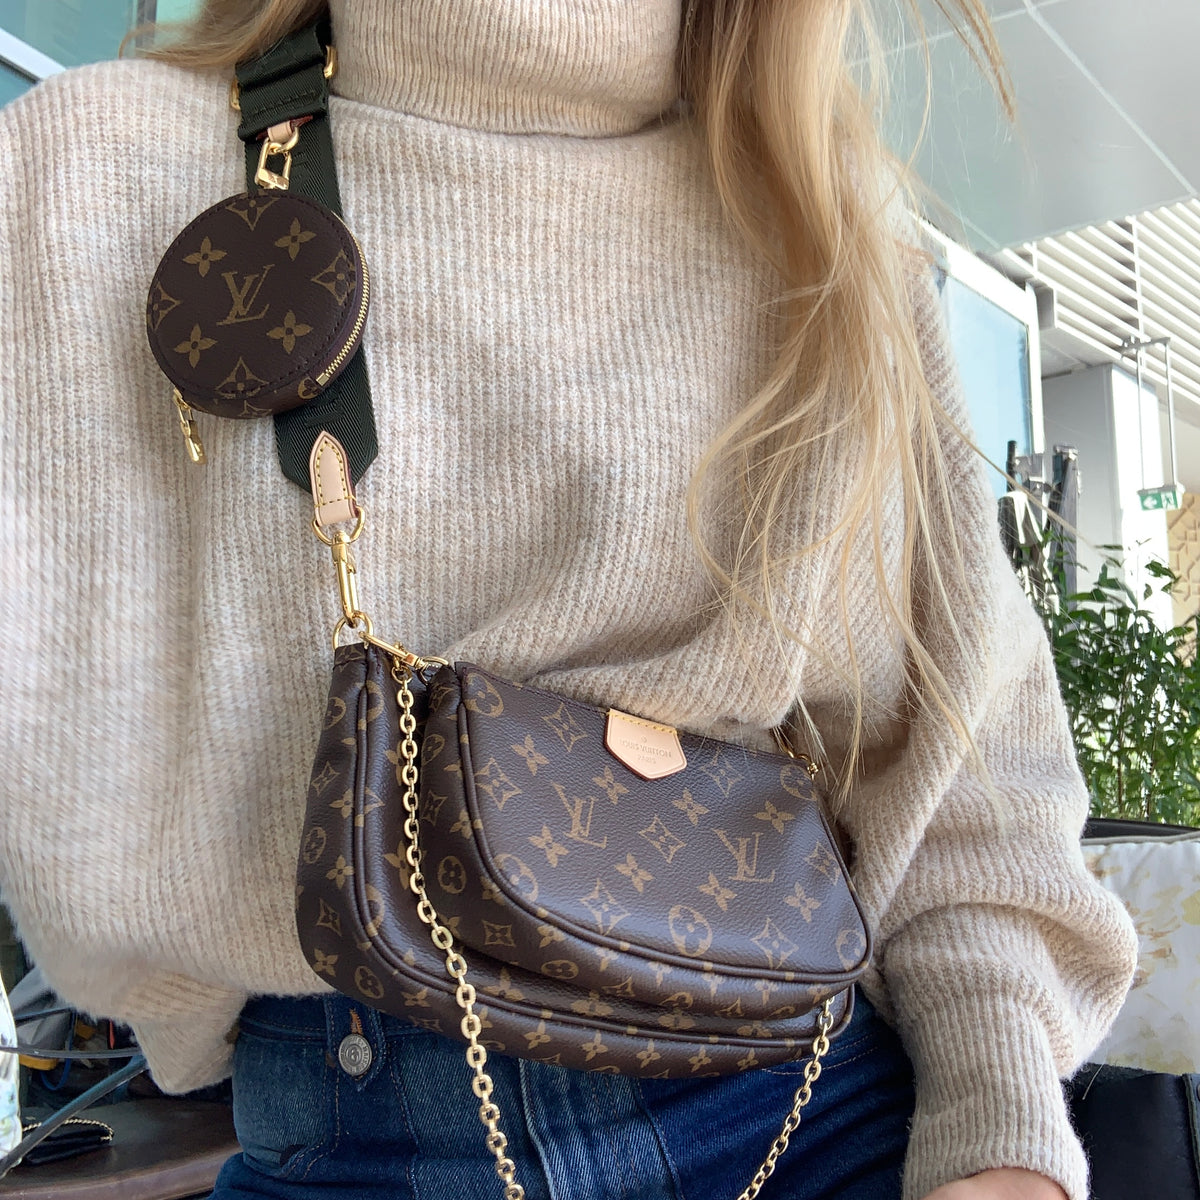 All the Different Ways to Wear LV's Multi Pochette Accessoires